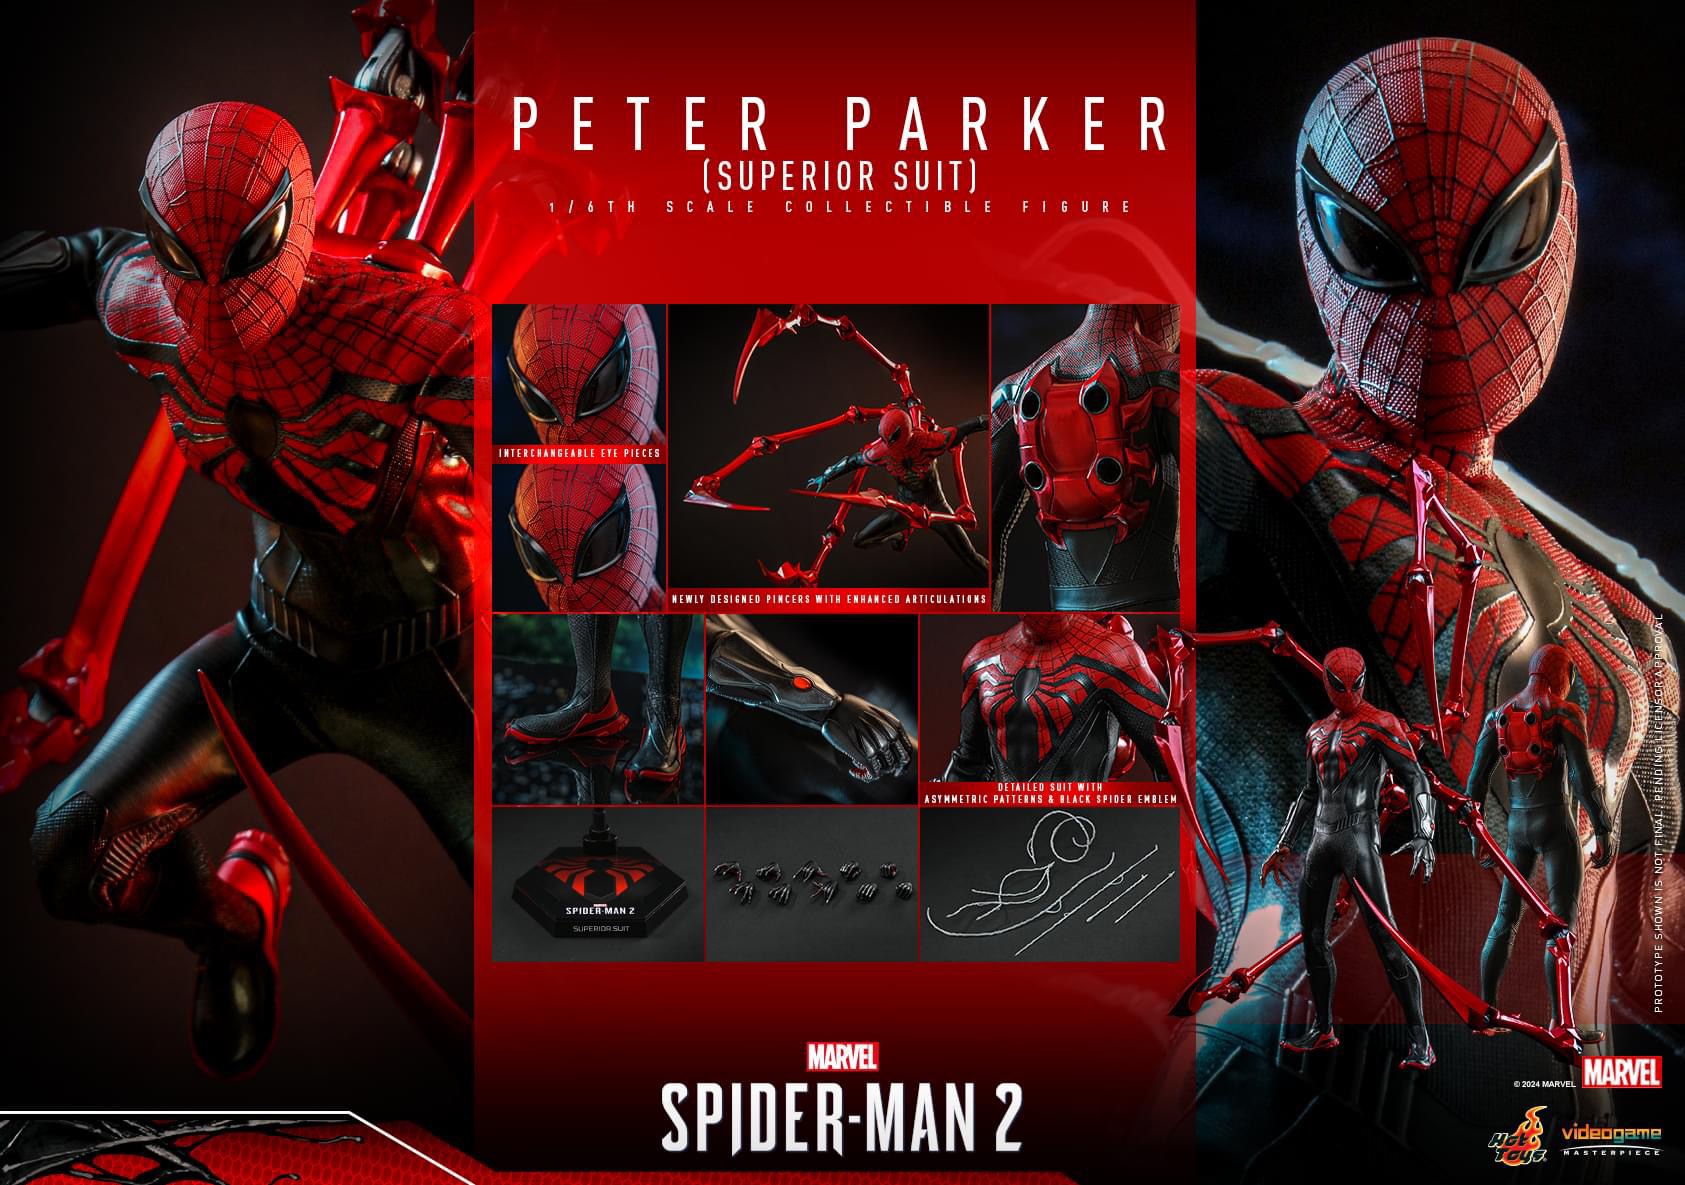 HOT TOYS VGM61 MARVEL'S SPIDER-MAN 2
PETER PARKER (SUPERIOR SUIT) 1/6TH SCALE COLLECTIBLE FIGURE